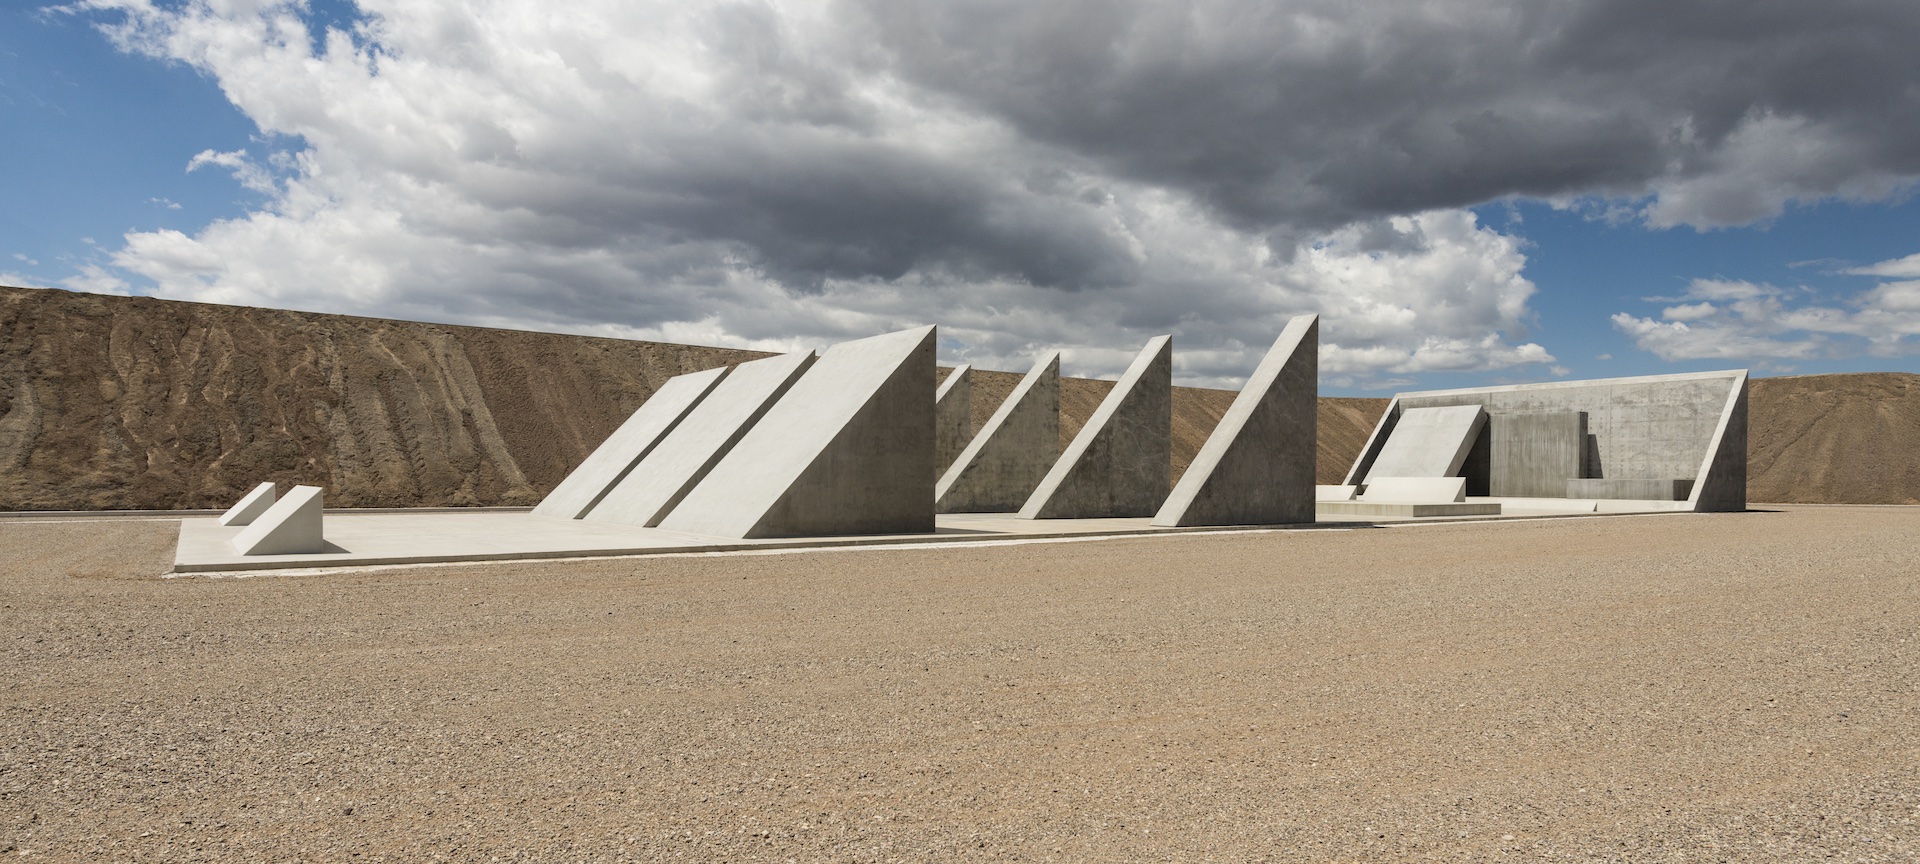 A collection of triangular shapes in Michael Heizer's City installation